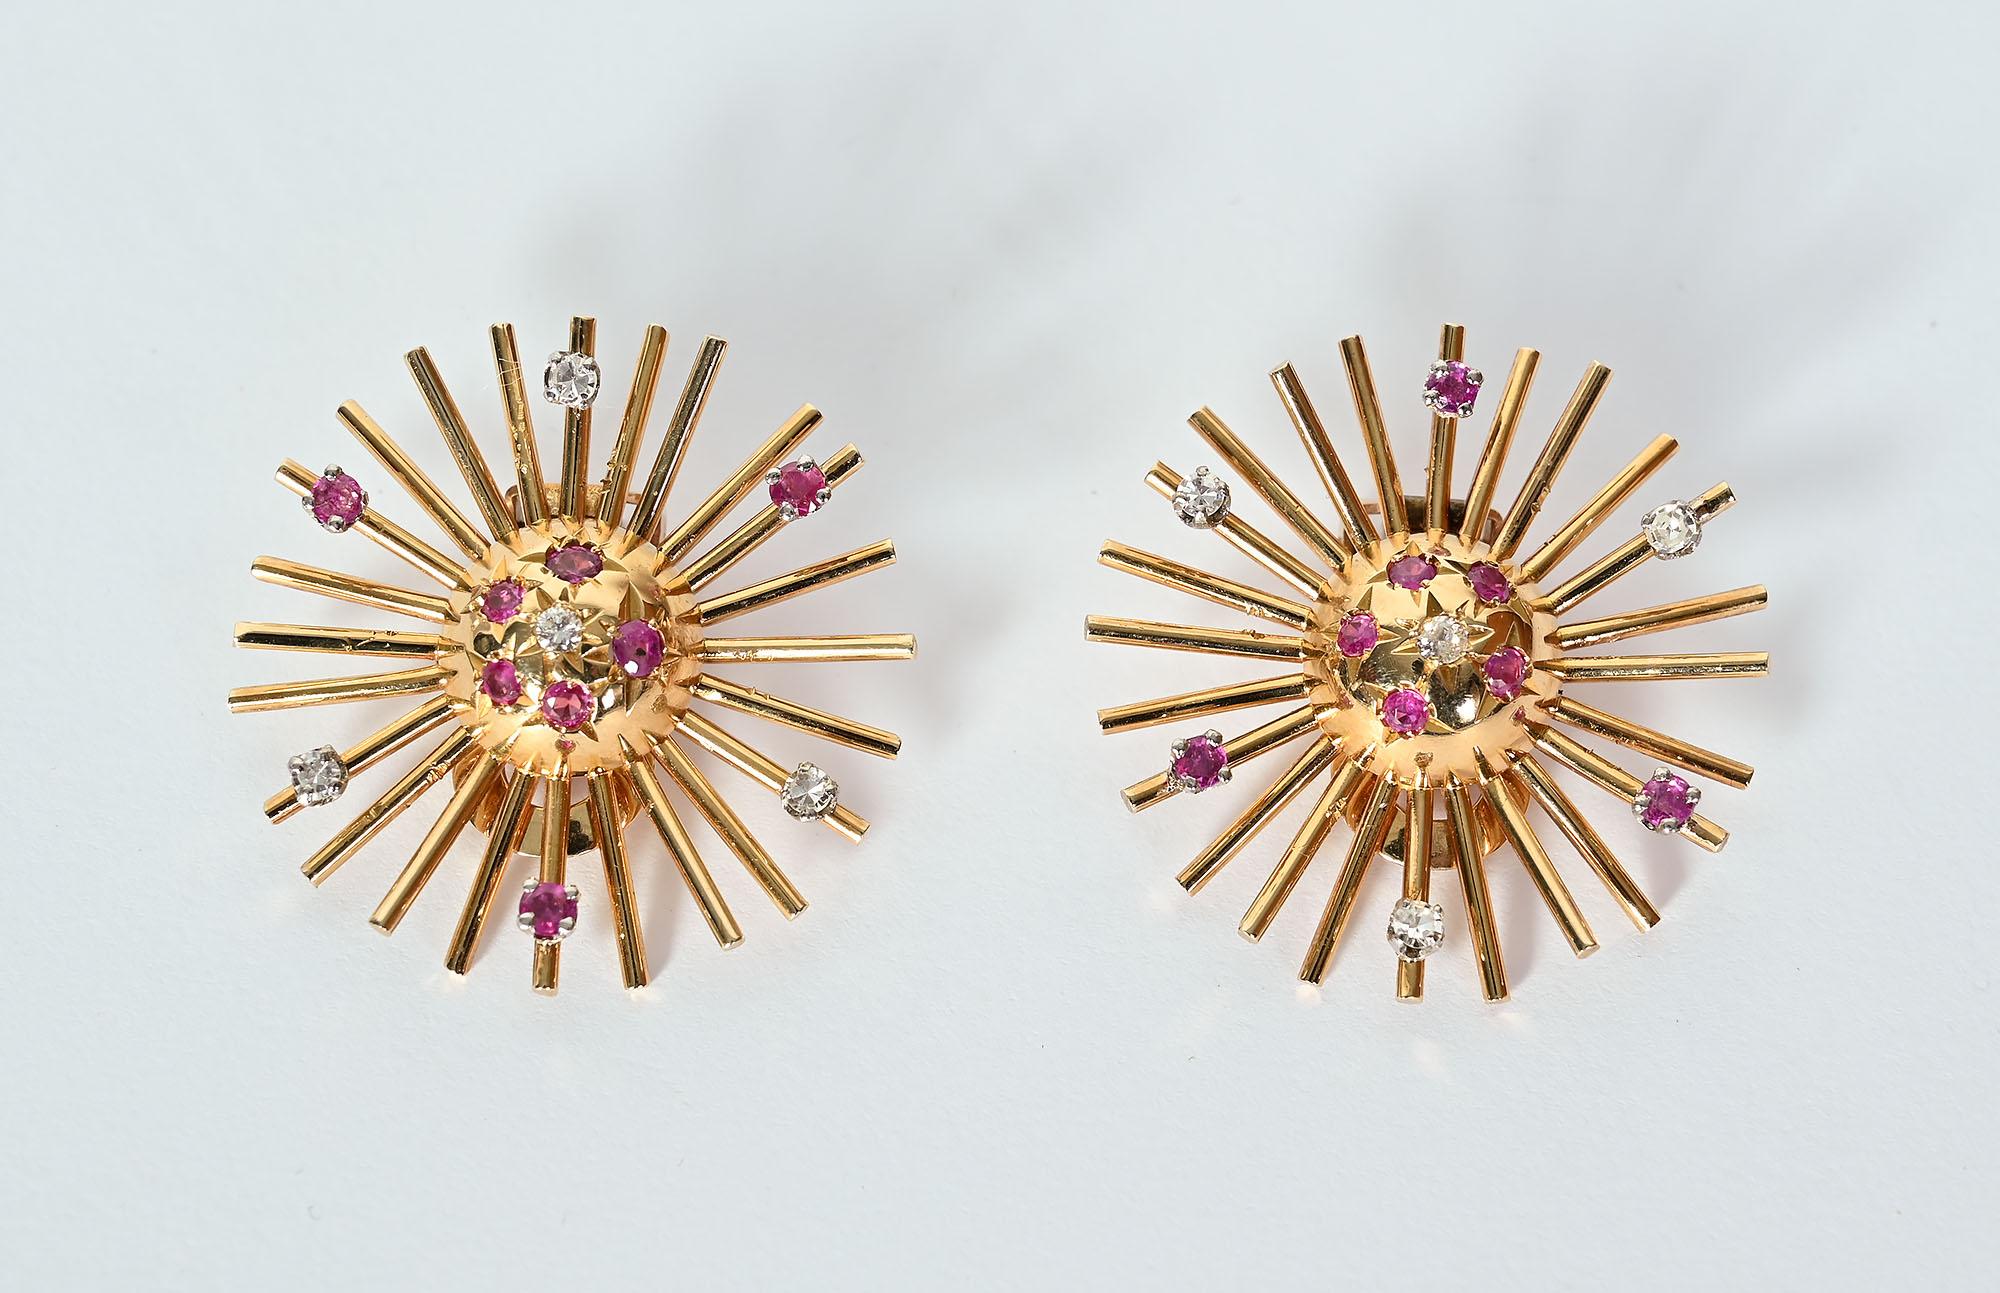 Retro Sunburst earrings in 14 karat rose gold. Domed centers add dimensionality to the earrings. They have eight round brilliant cut diamonds with a total weight of .32 carats and sixteen amethysts weighing 10.45 dwt.
A matching brooch is available